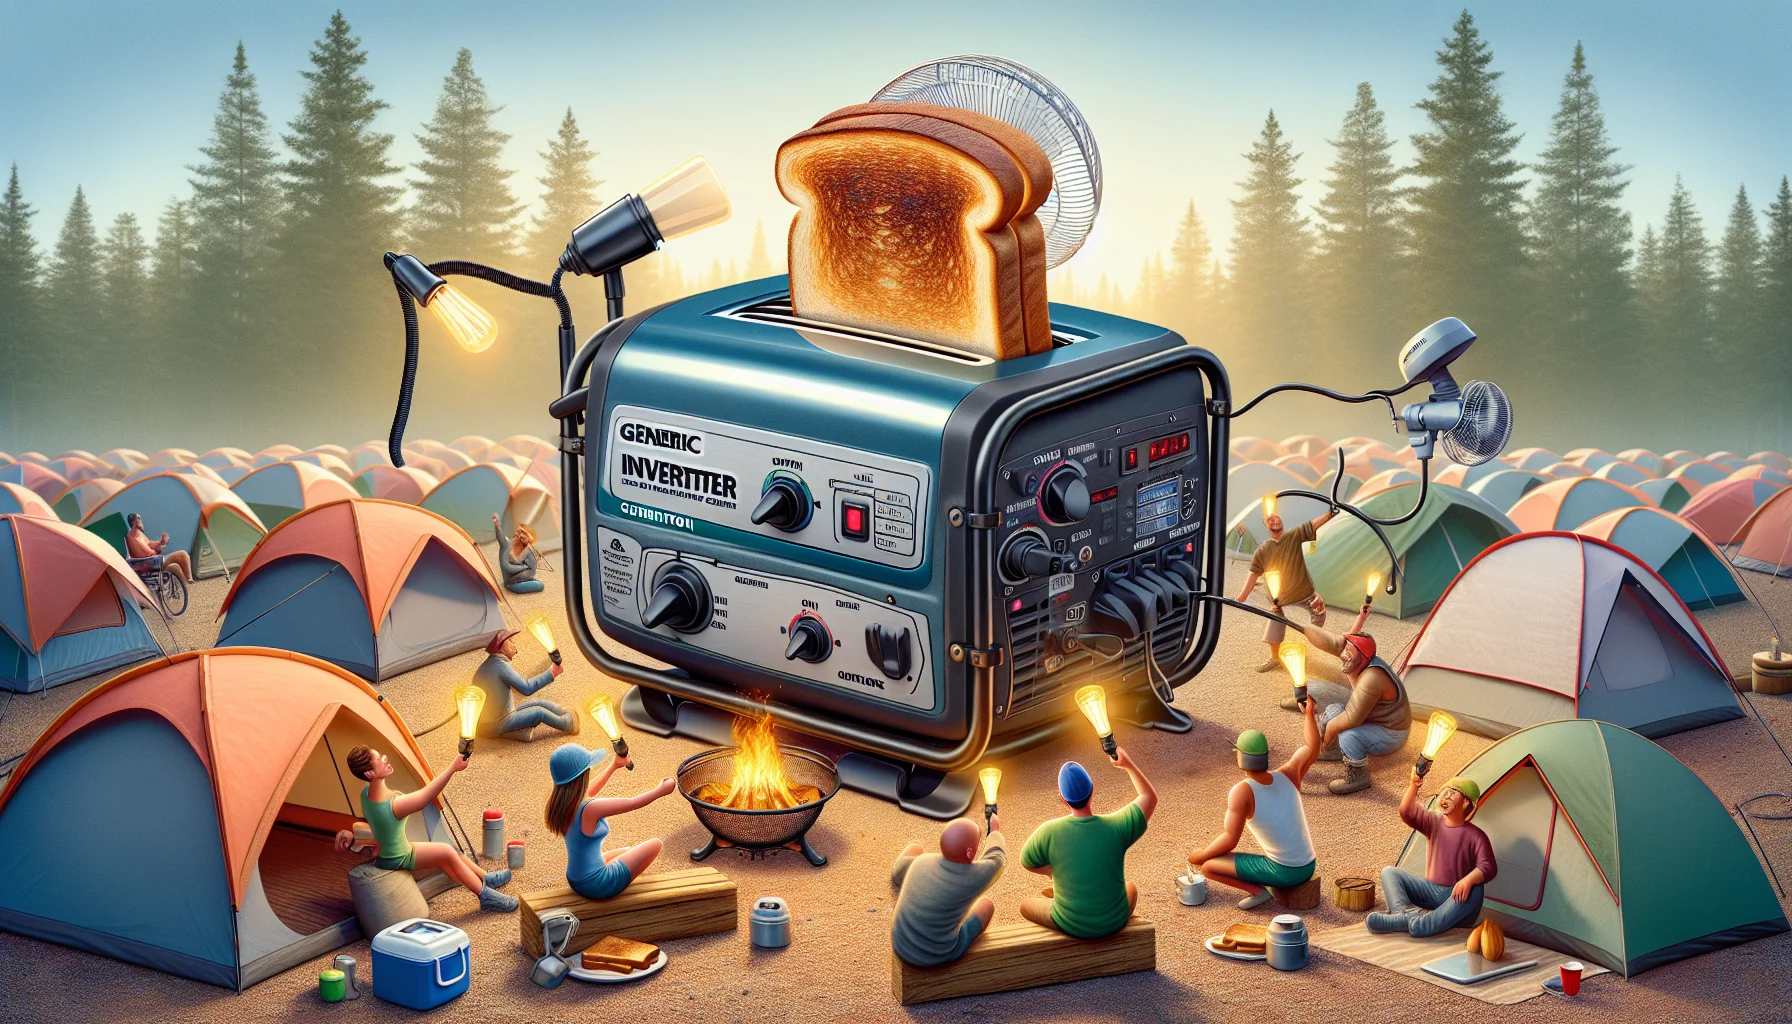 Generate a humorous and realistic scene of a generic dual fuel inverter generator. It's happily churning out electricity in a campsite setting with a plug-in toaster making toast and a plug-in electric fan blowing the toast scent across the area. Include people of diverse descents and genders who are around, drawn in by the aroma, and are entertained with the scenario. They are holding up their camping lamps to the generator in a cheeky toast, indicating their appreciation of the electricity it provides.